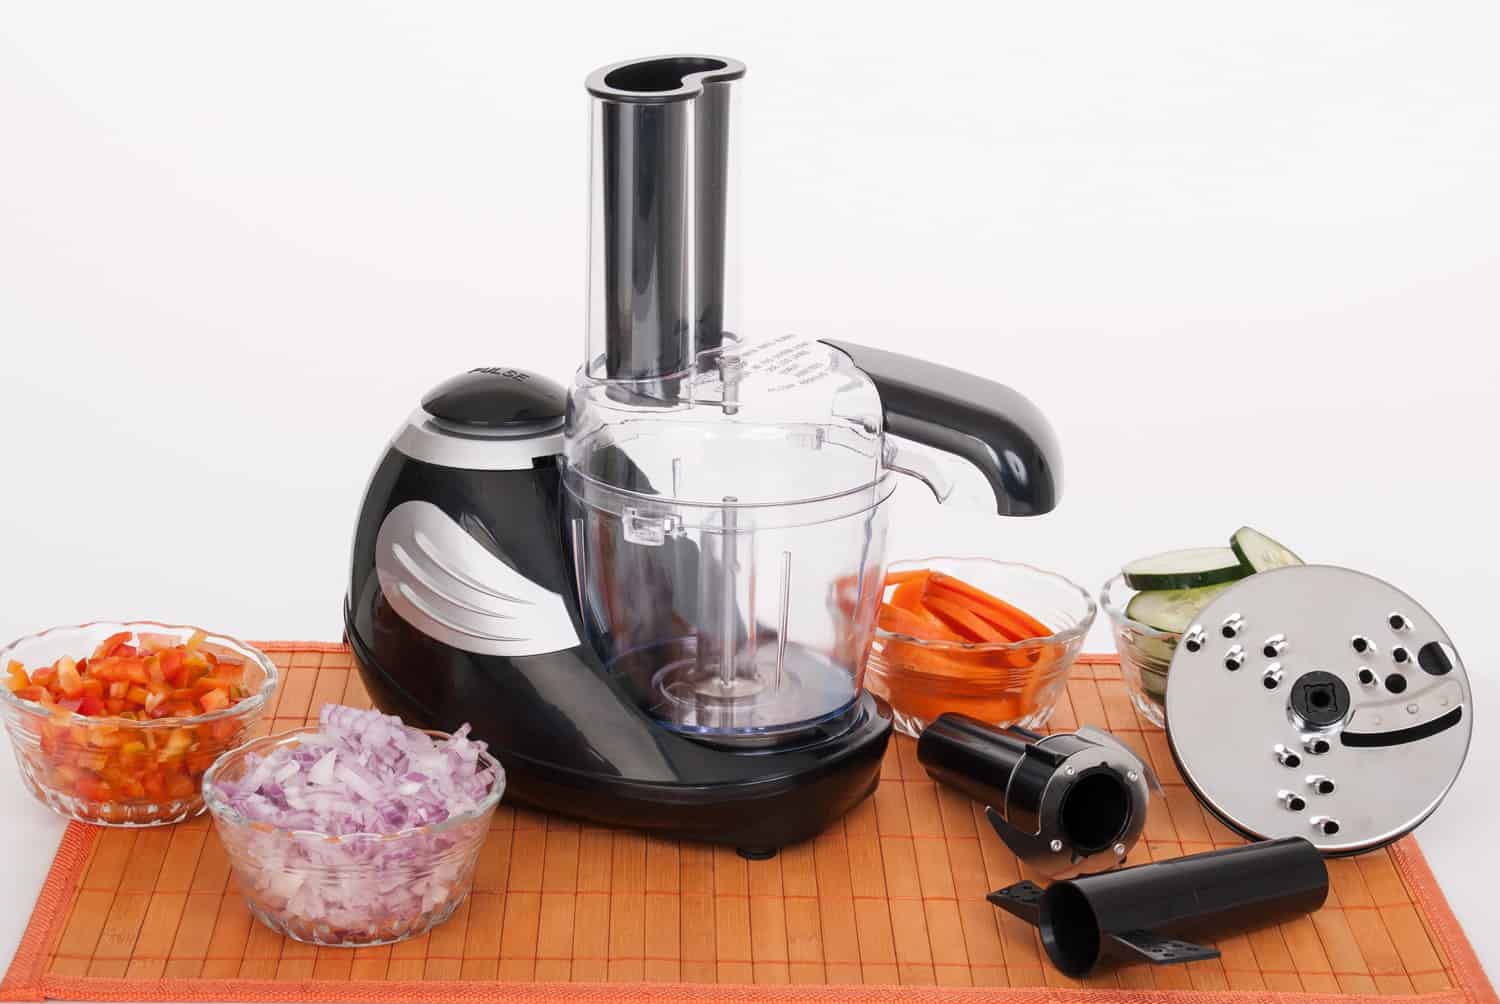 Food processor with accessories on white background.